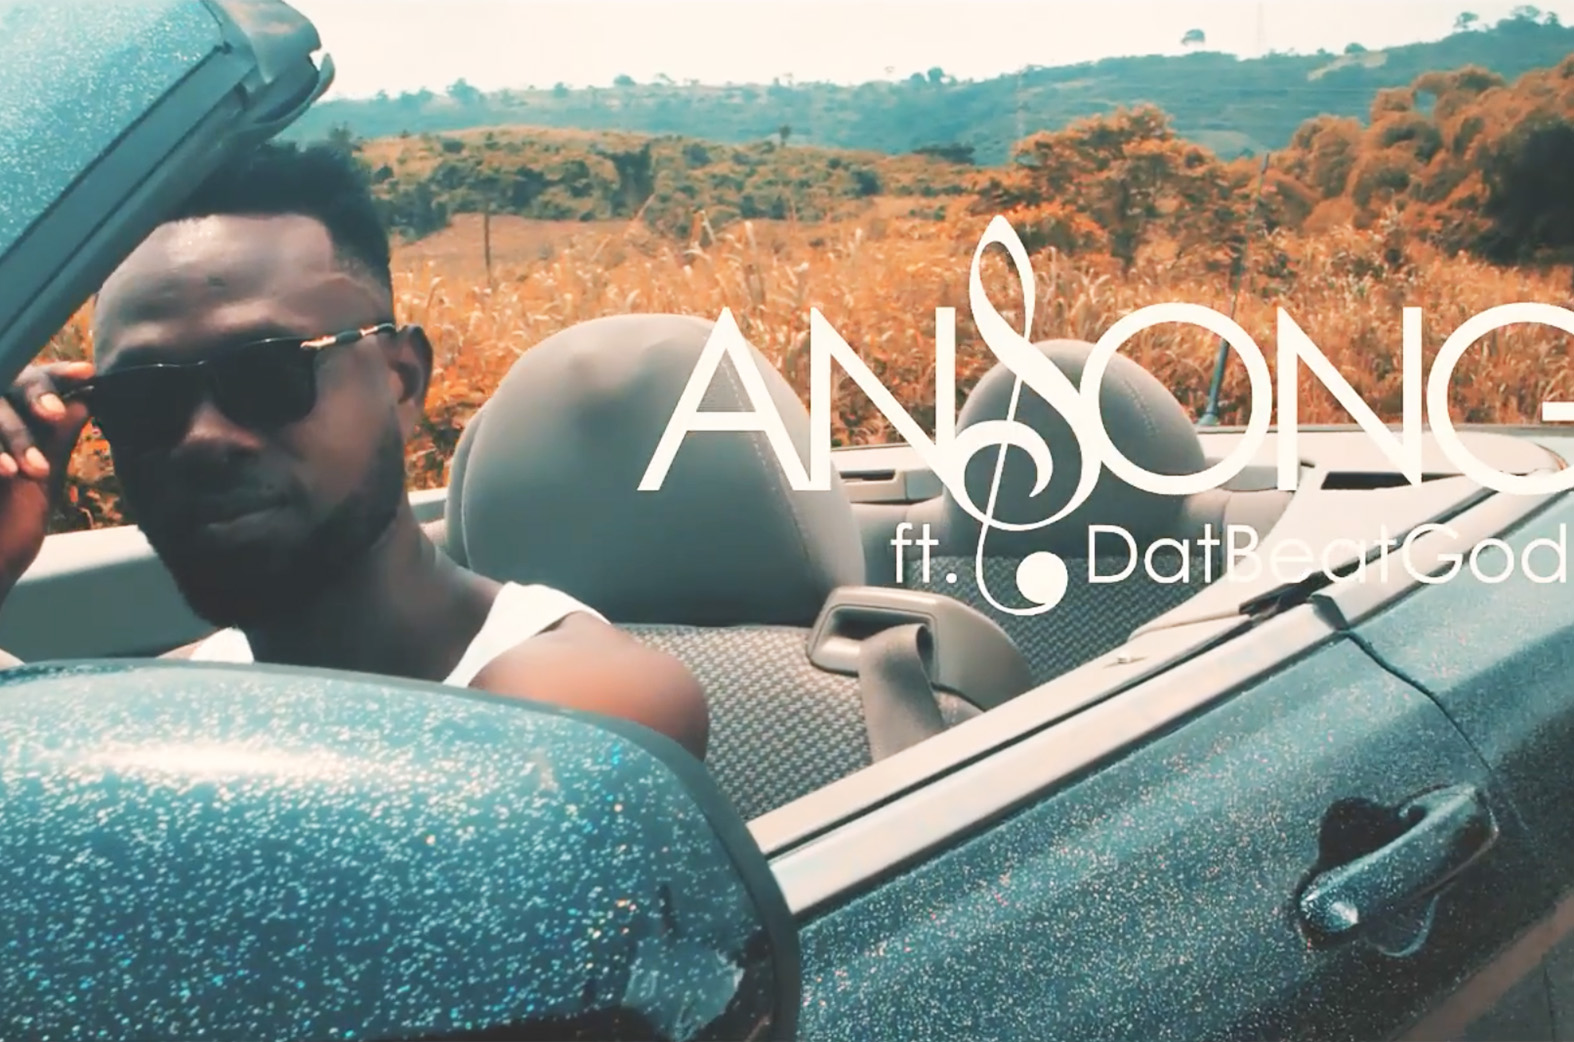 Video: Love Chain by Ansong